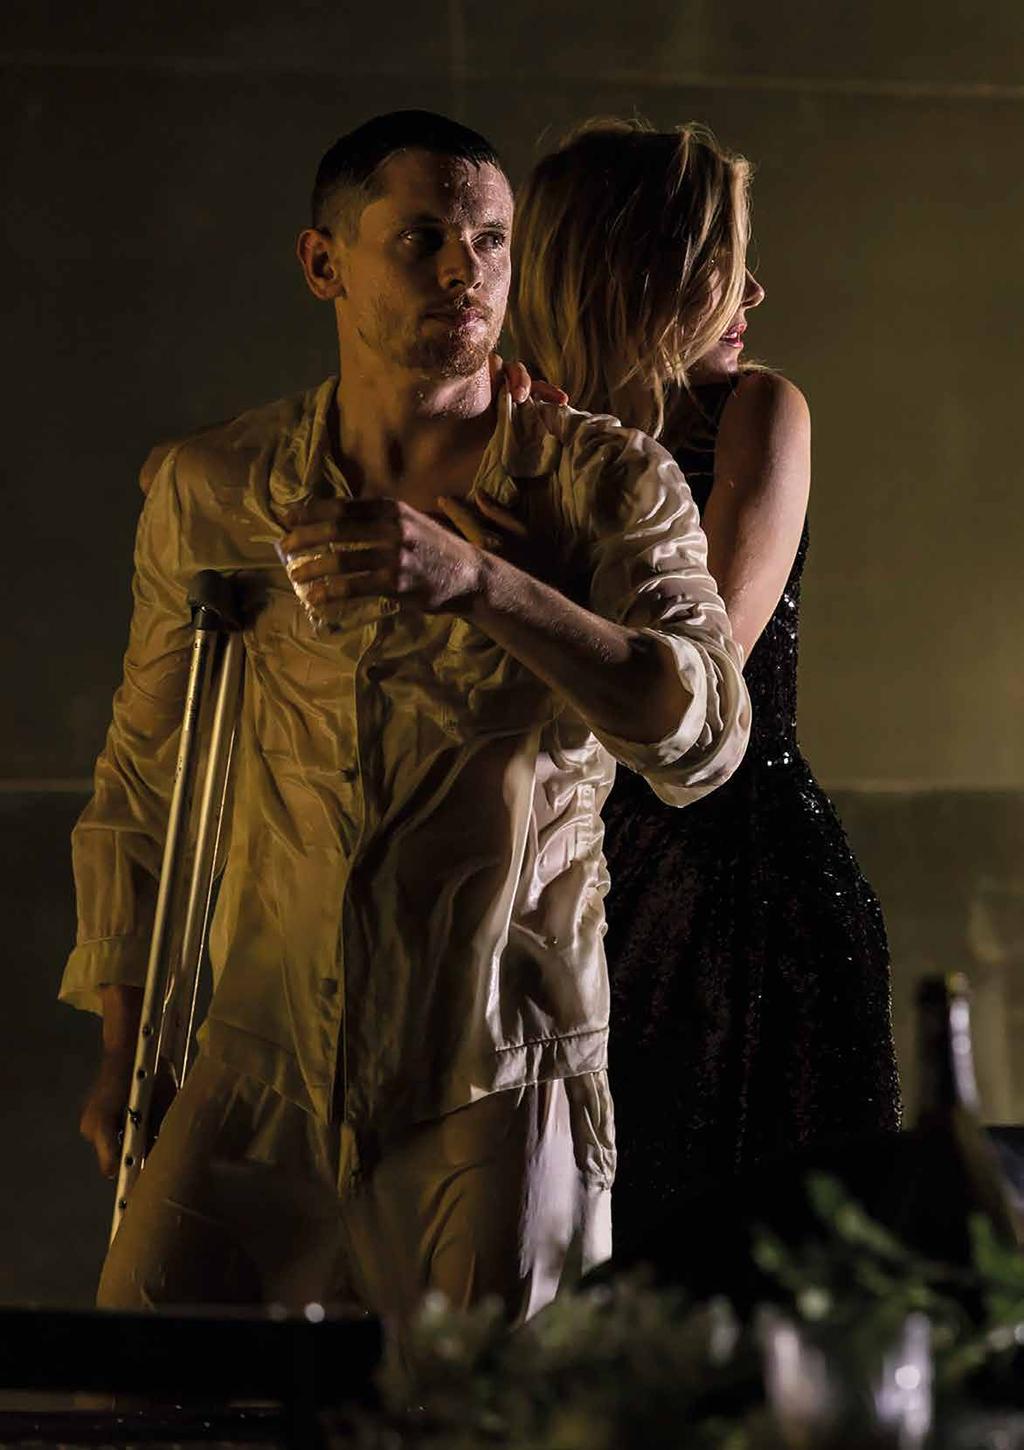 11 Jan - Apr 2018 Box Office: 01539 725133 For full listings and to book online: breweryarts.co.uk Cat on a Hot Tin Roof - Mon 26 Feb Stage on ScreeN Rigoletto ROH Live Tue 16 Jan Theatre Starts 7.